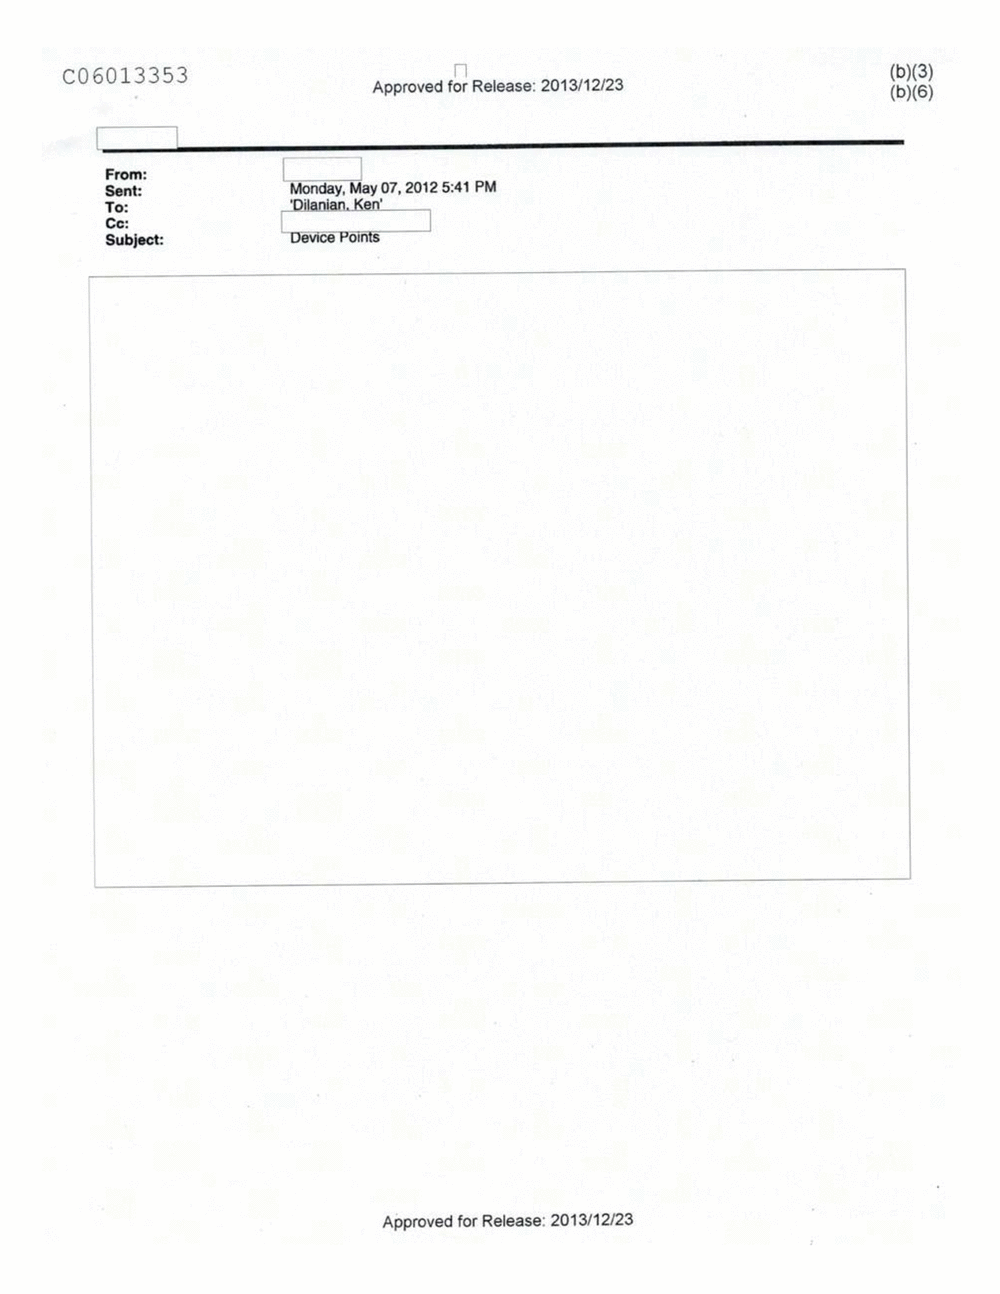 Page 266 from Email Correspondence Between Reporters and CIA Flacks